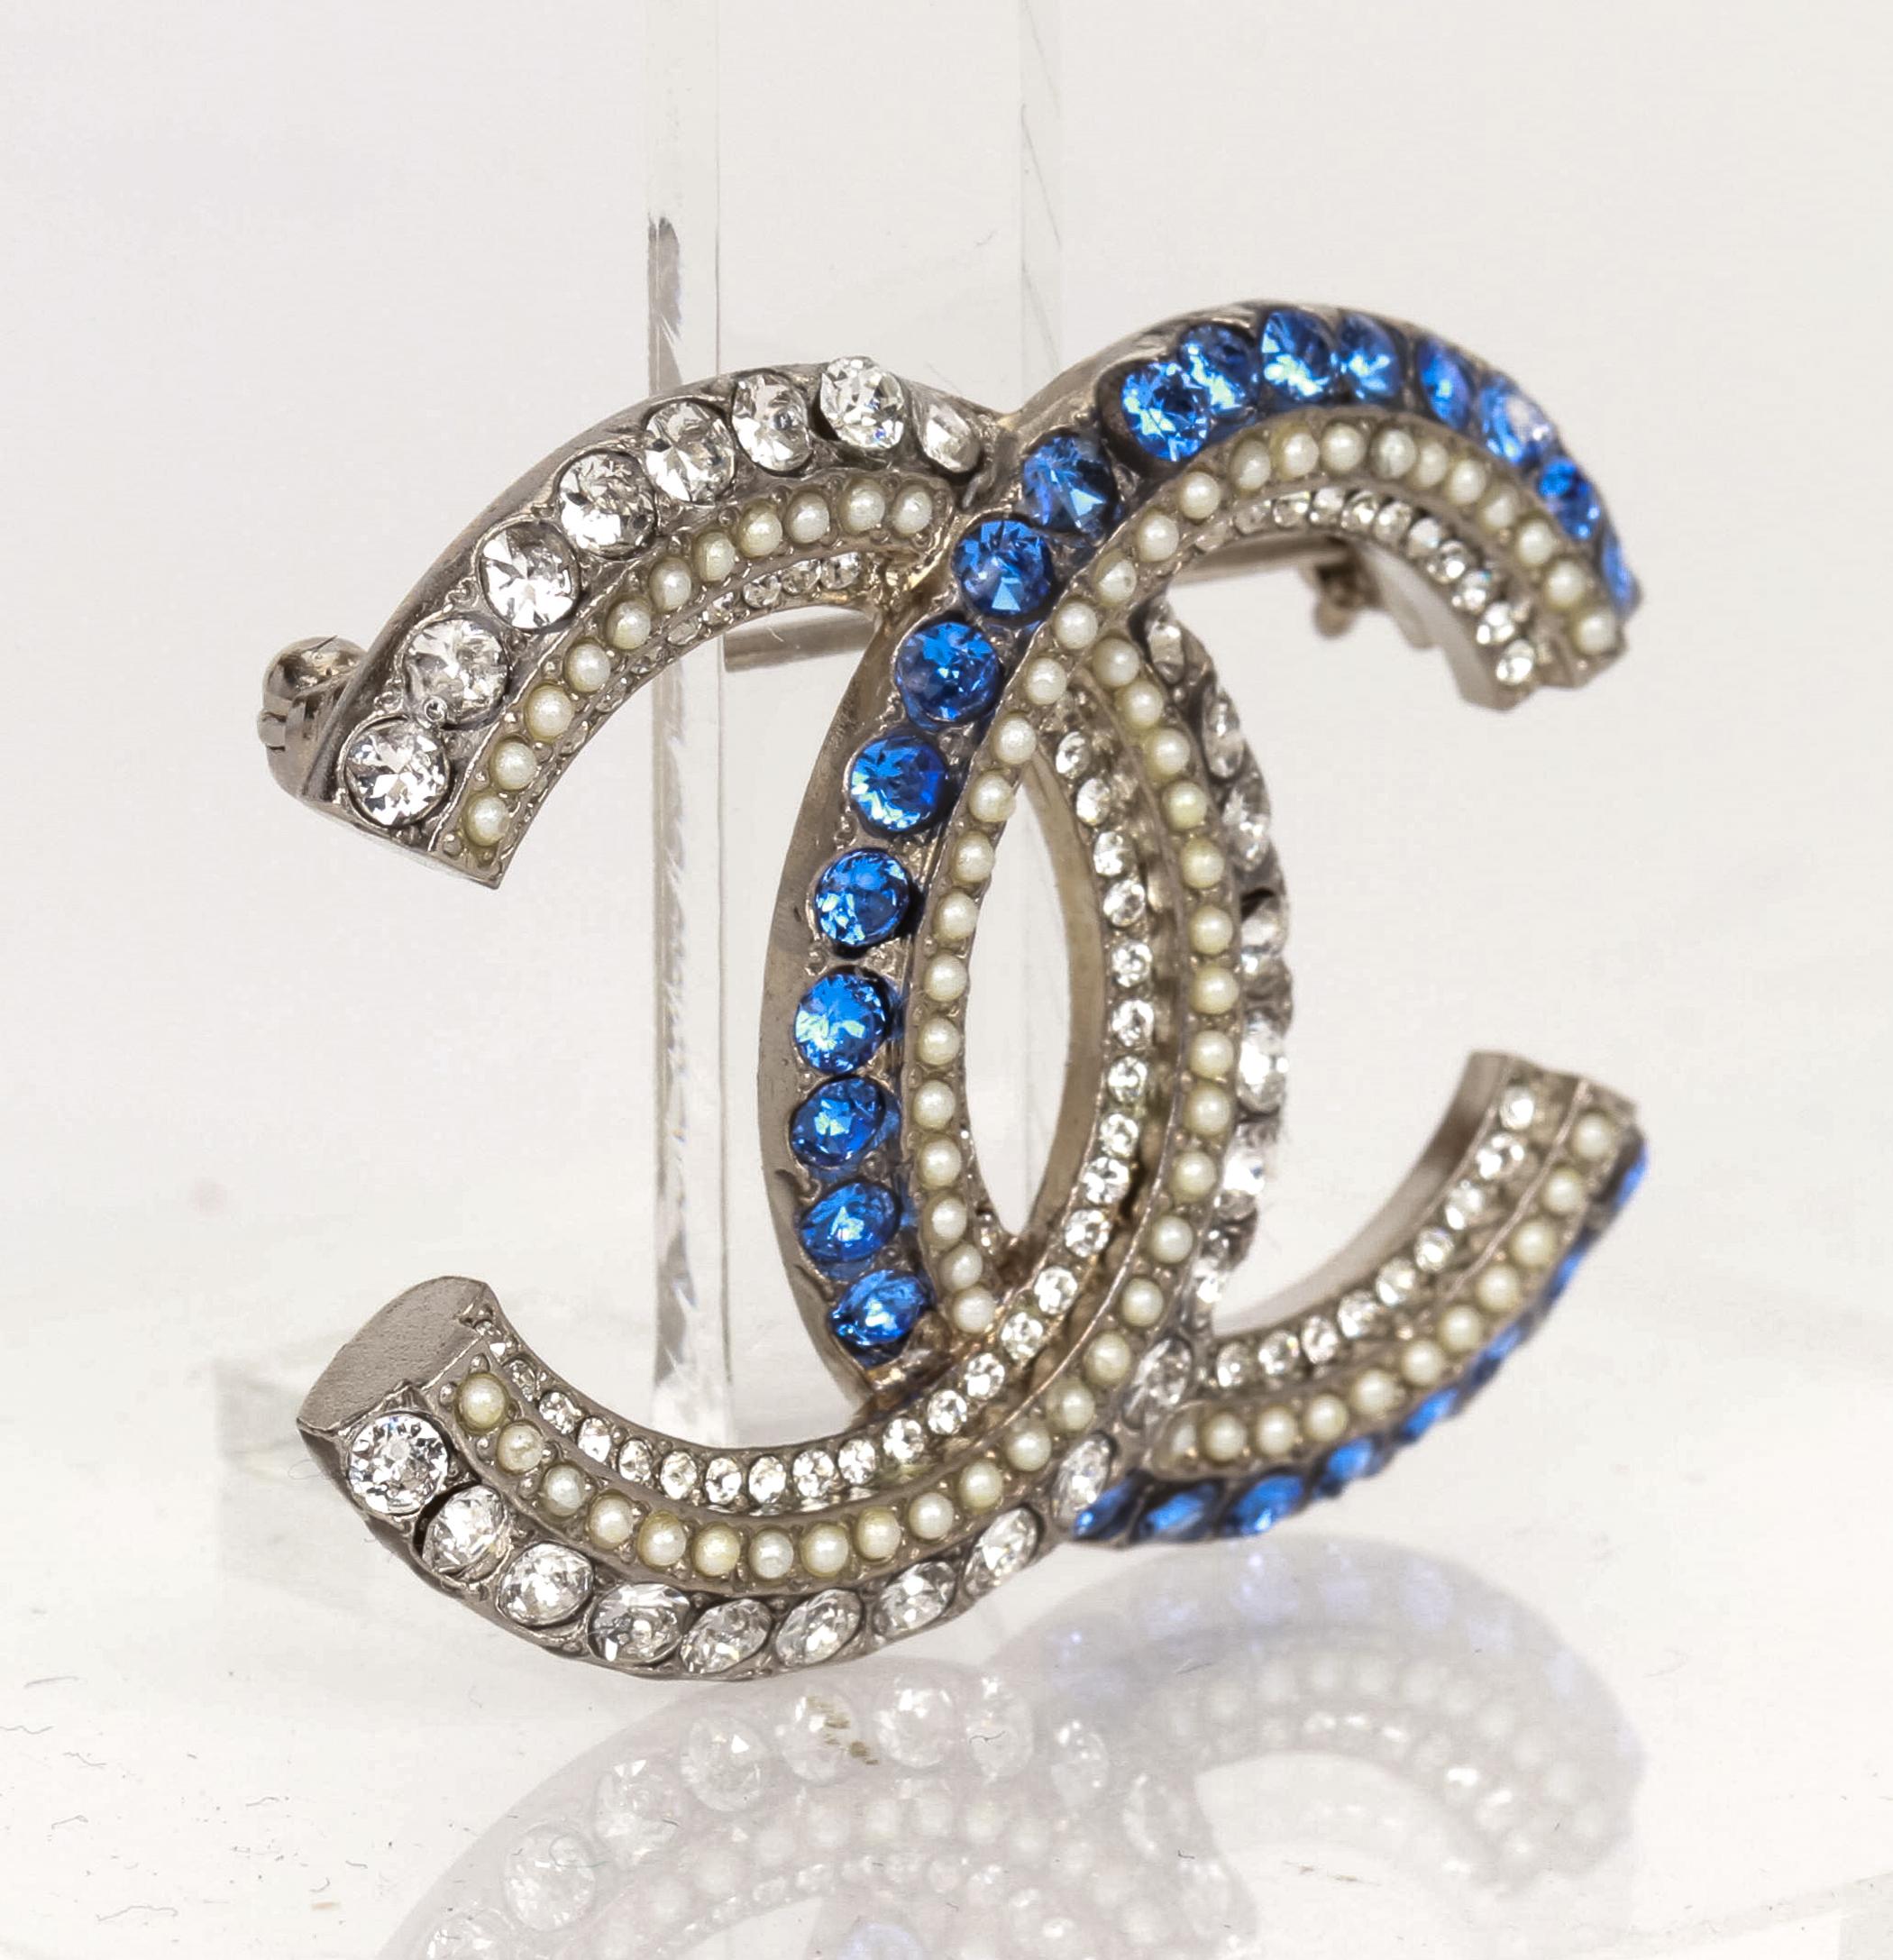 Magnificent Chanel brooch with interlocking CC logo design, with blue and clear rhinestone as well as micro pearls. Comes with velvet pouch.
